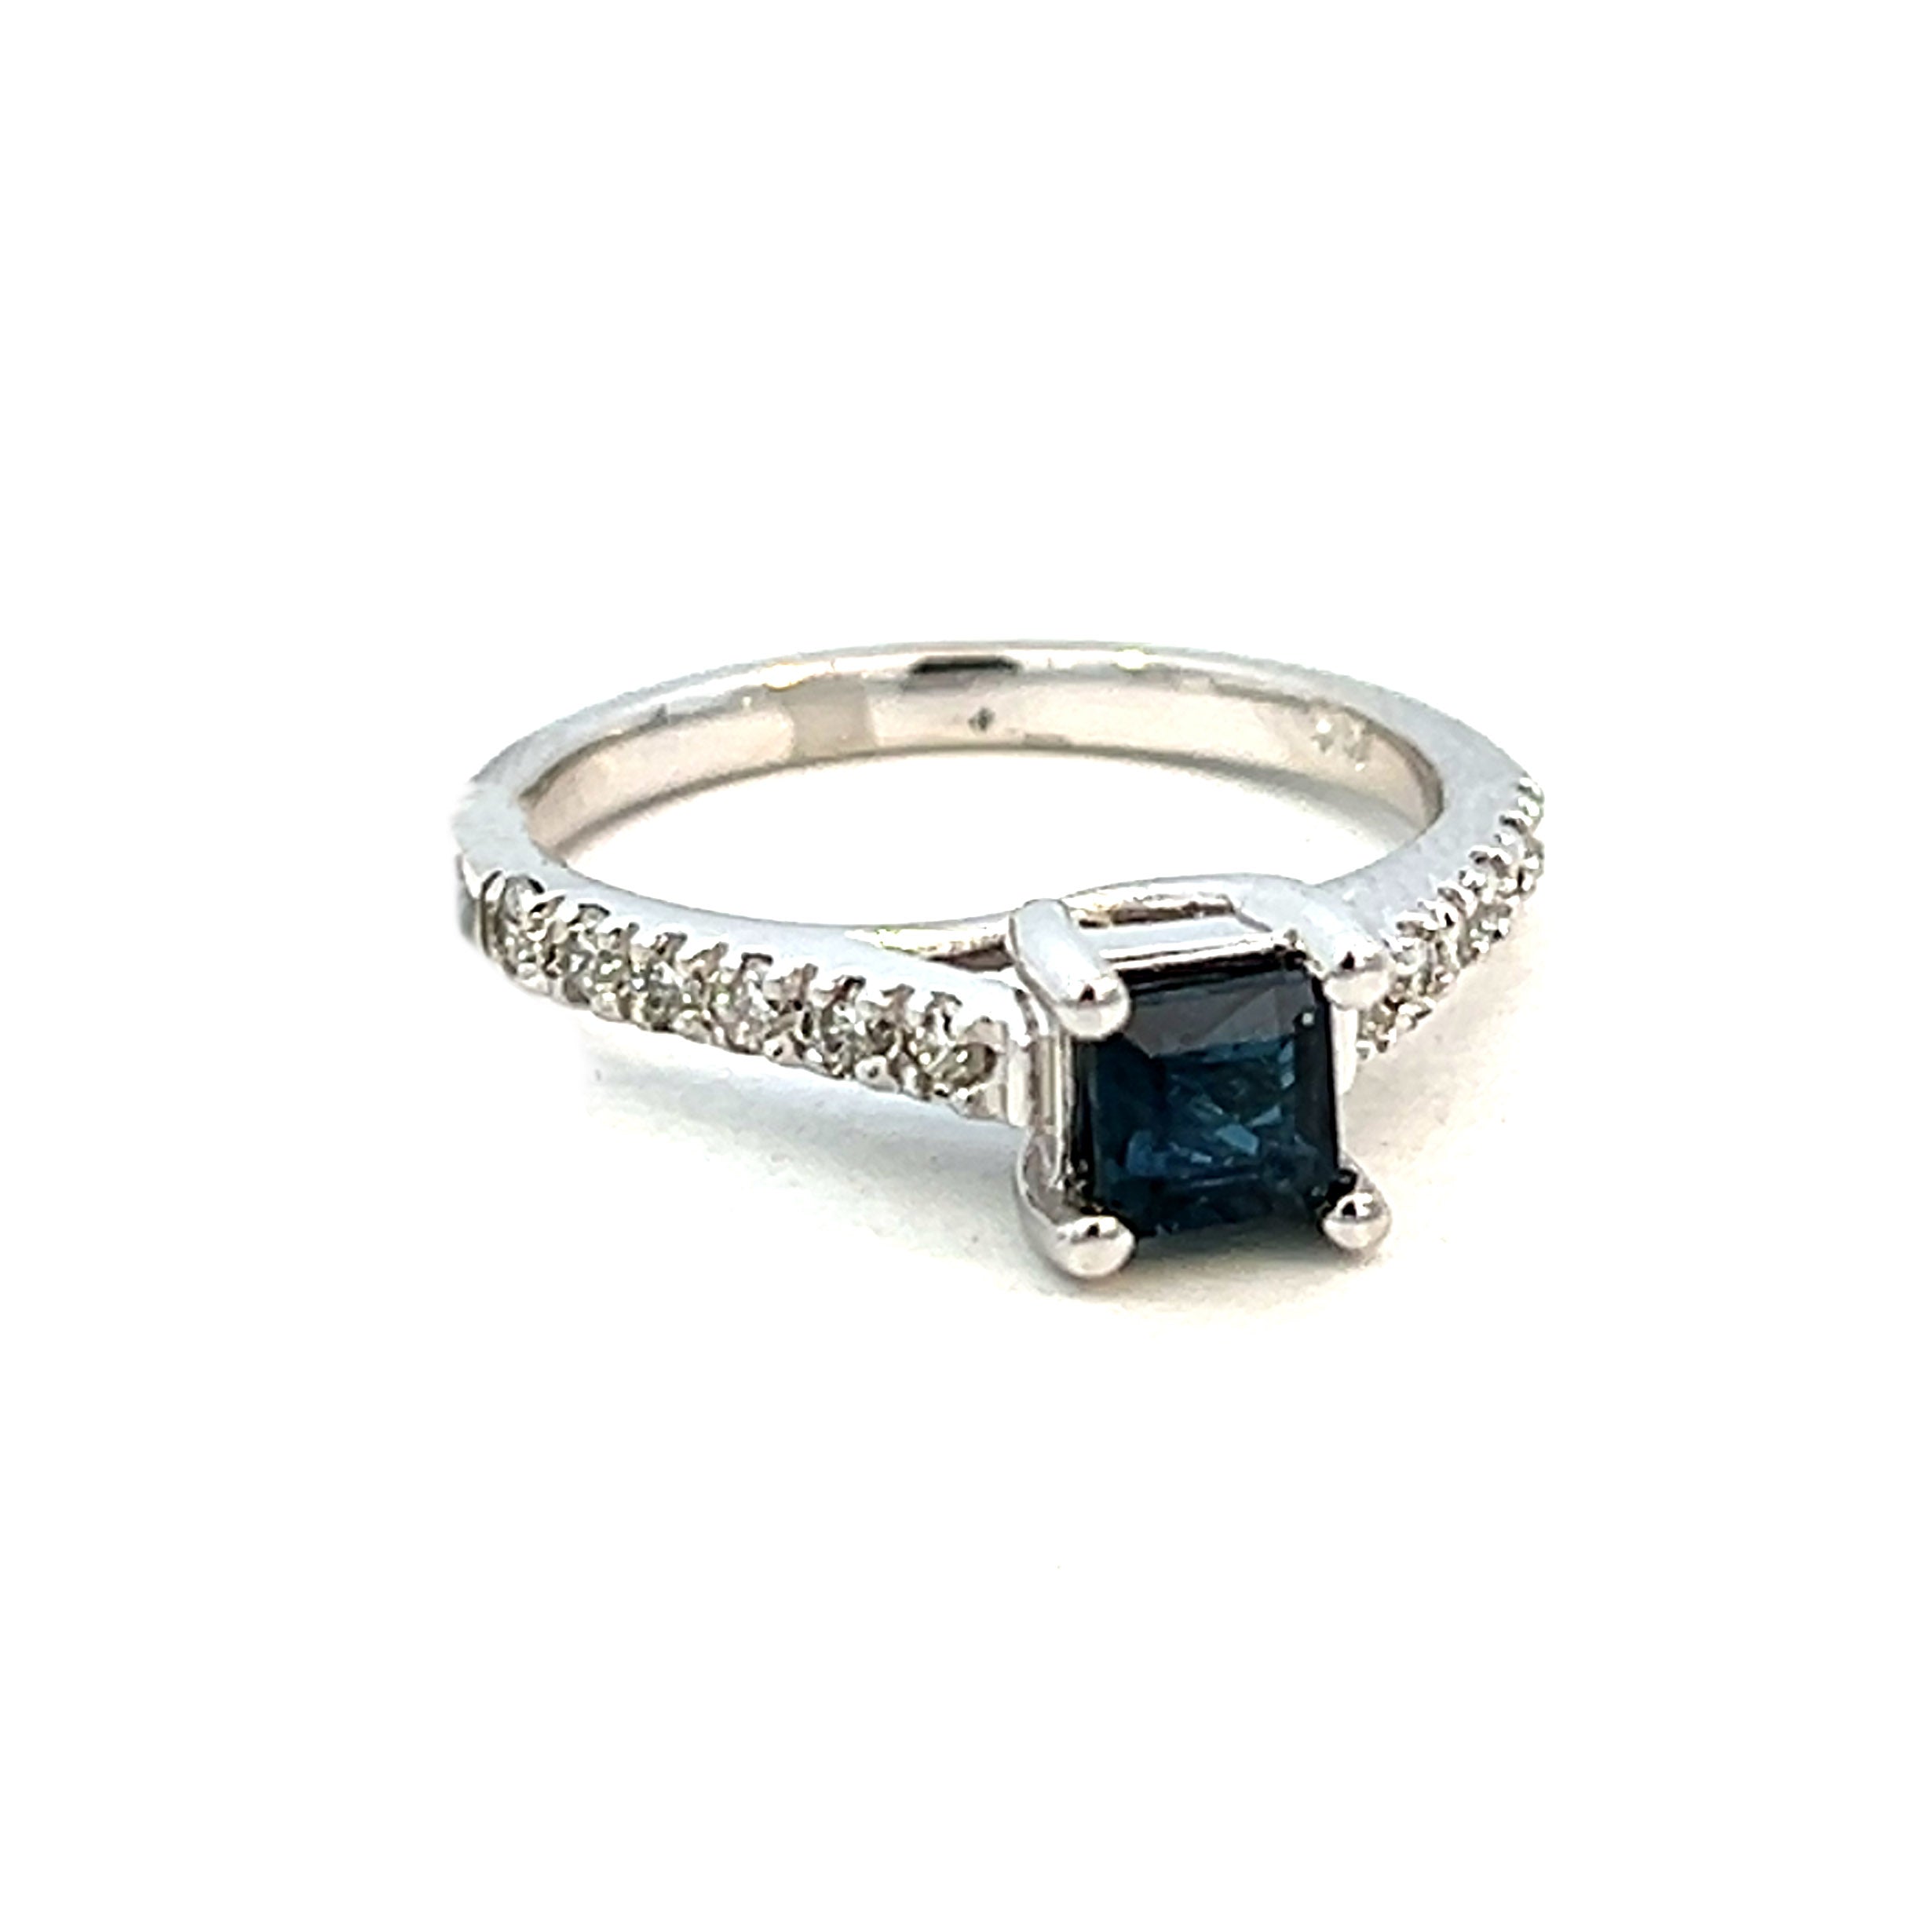 925 Sterling Silver Vintage Princess Cut Lab Sapphire Engagement Ring  Bridal Womens Fine Jewelry Rings In US Sizes 5 12 220309 From Buyocean08,  $3.05 | DHgate.Com